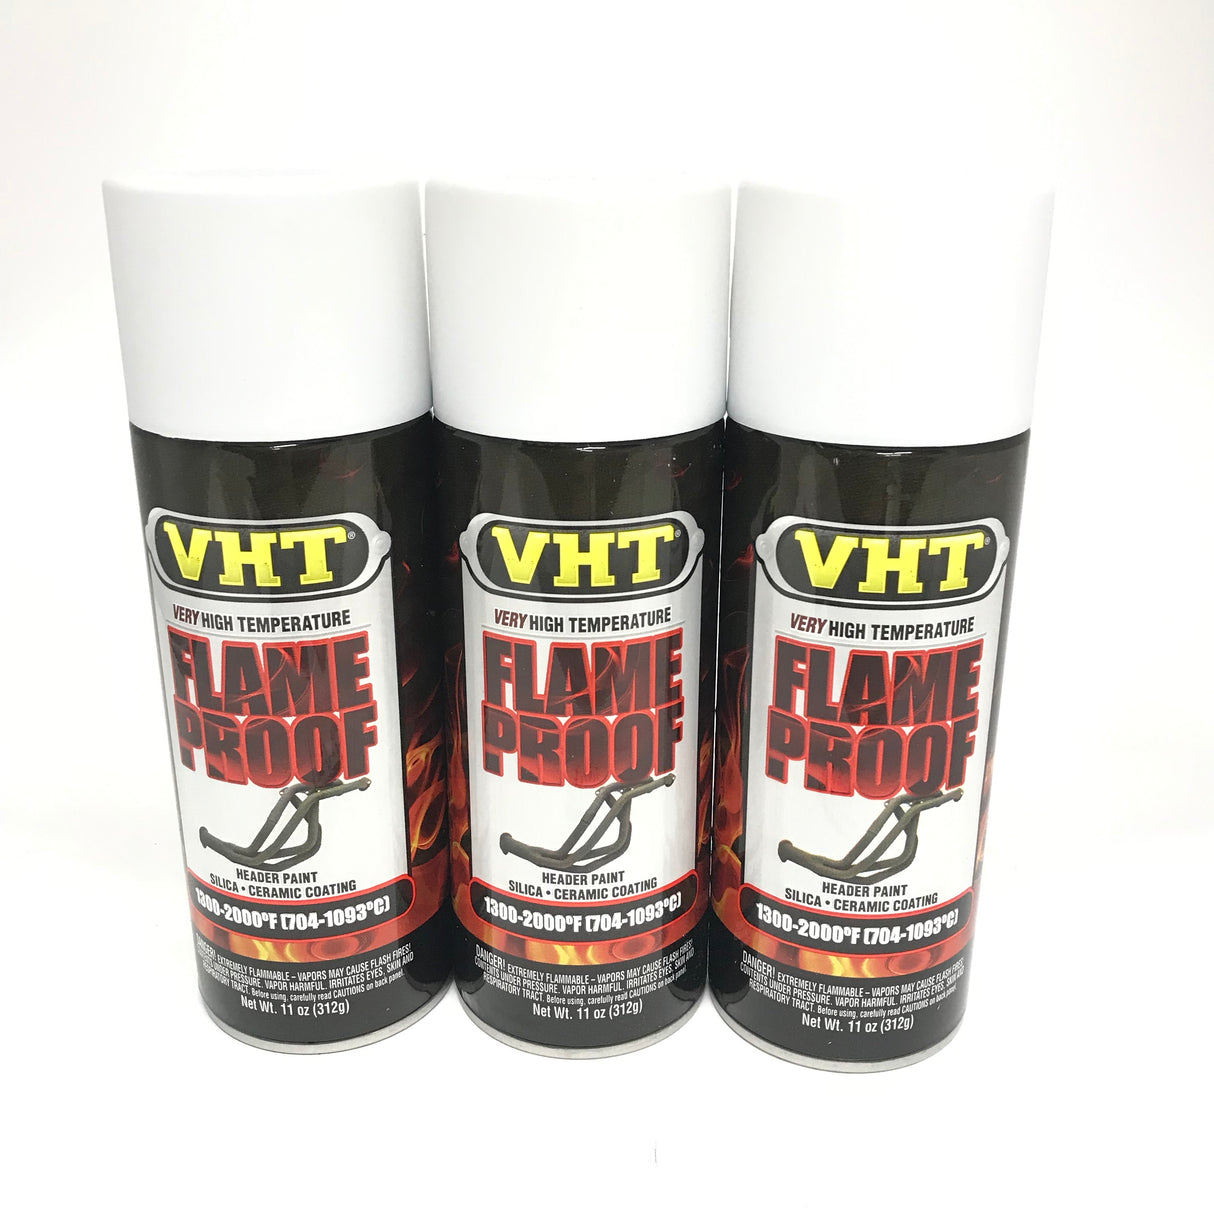 VHT SP101-3 PACK FLAT WHITE High Temperature FlameProof Header Paint - 11 oz